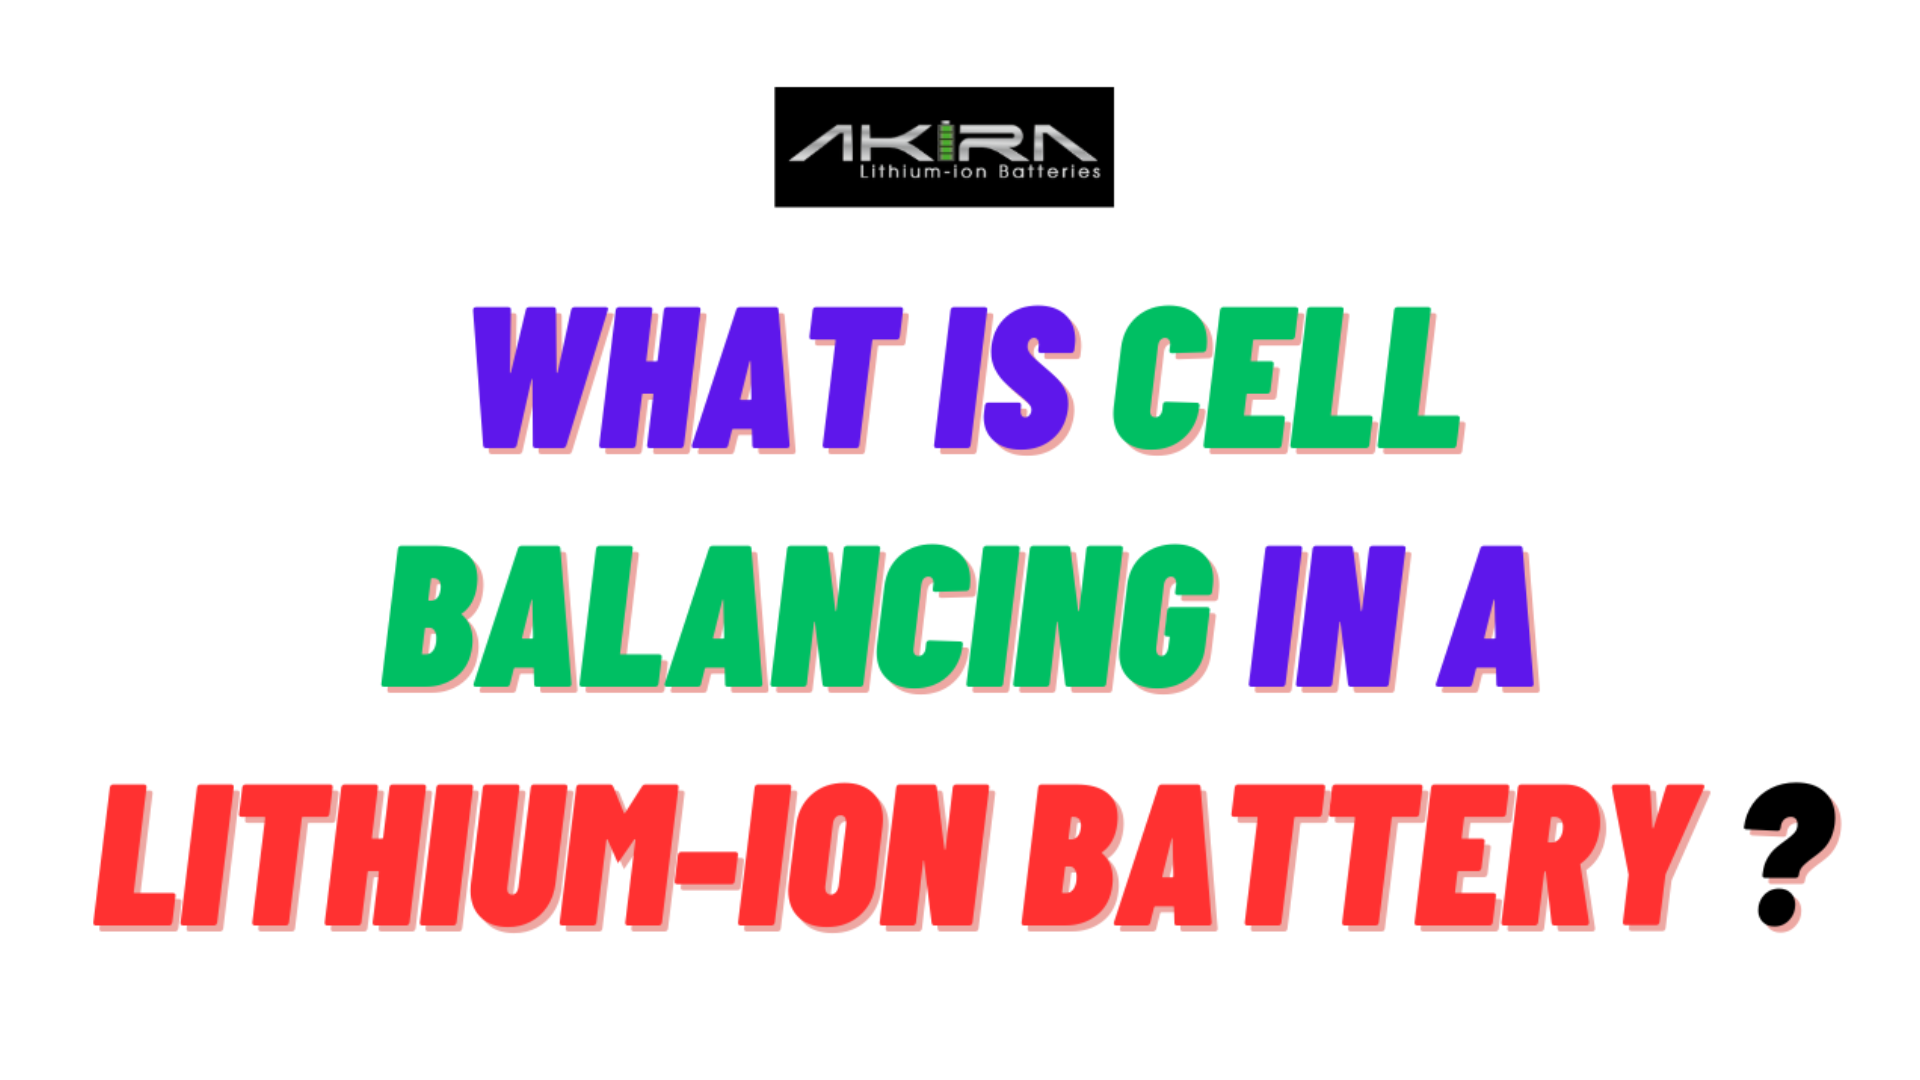 What is Cell balancing in a lithium-ion battery?